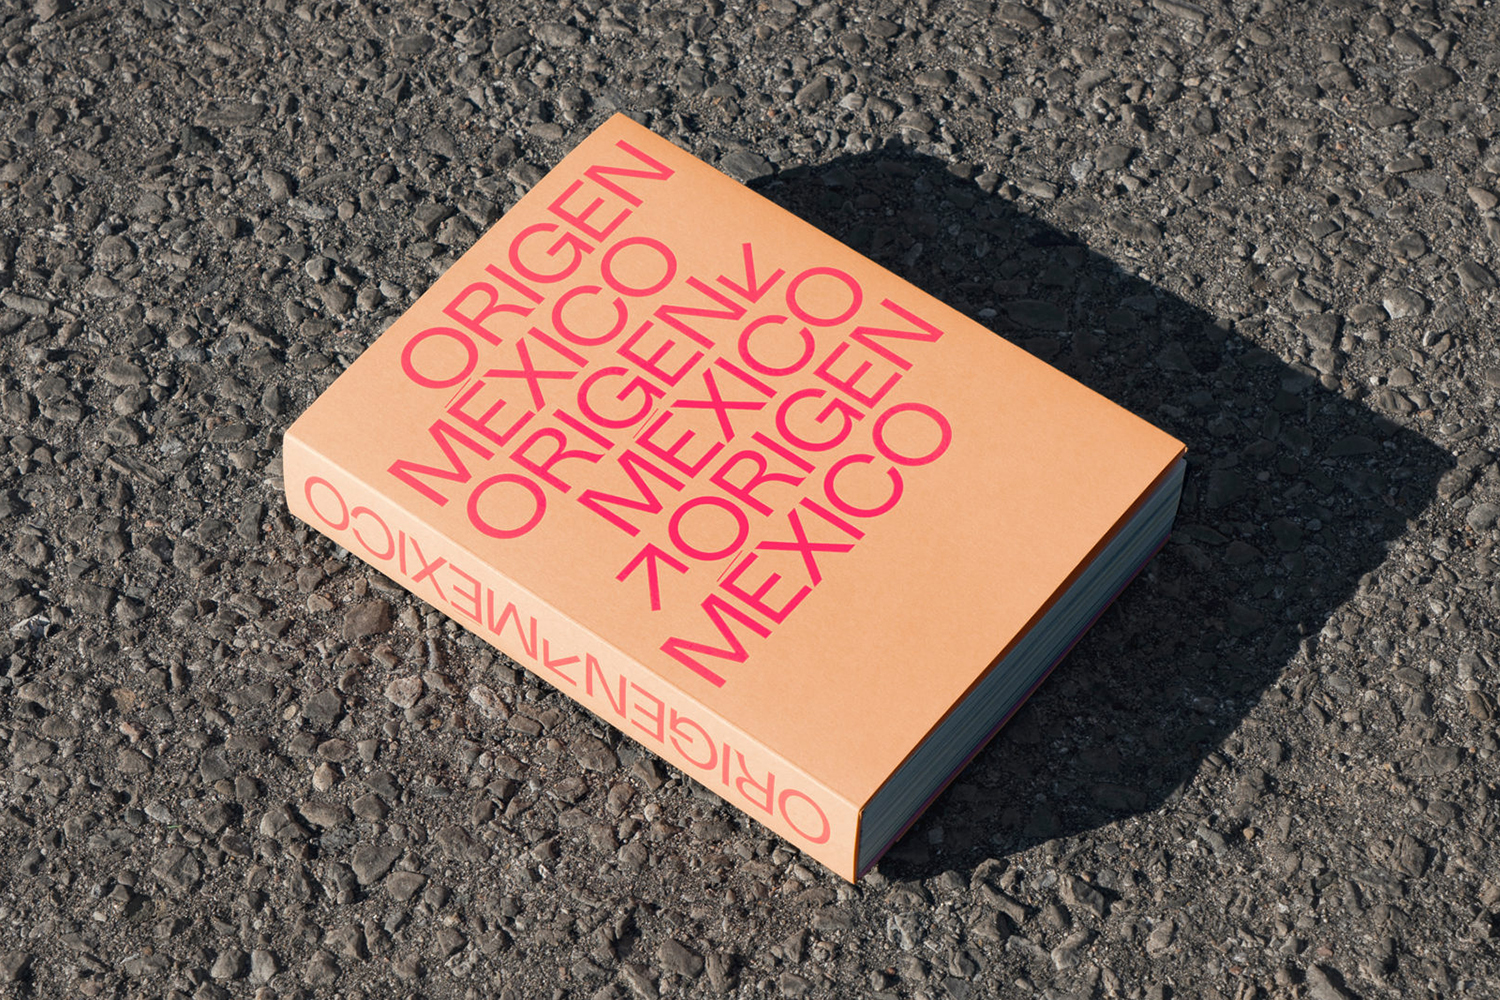 A new book on Mexican culture designed by Canadian studio Blok